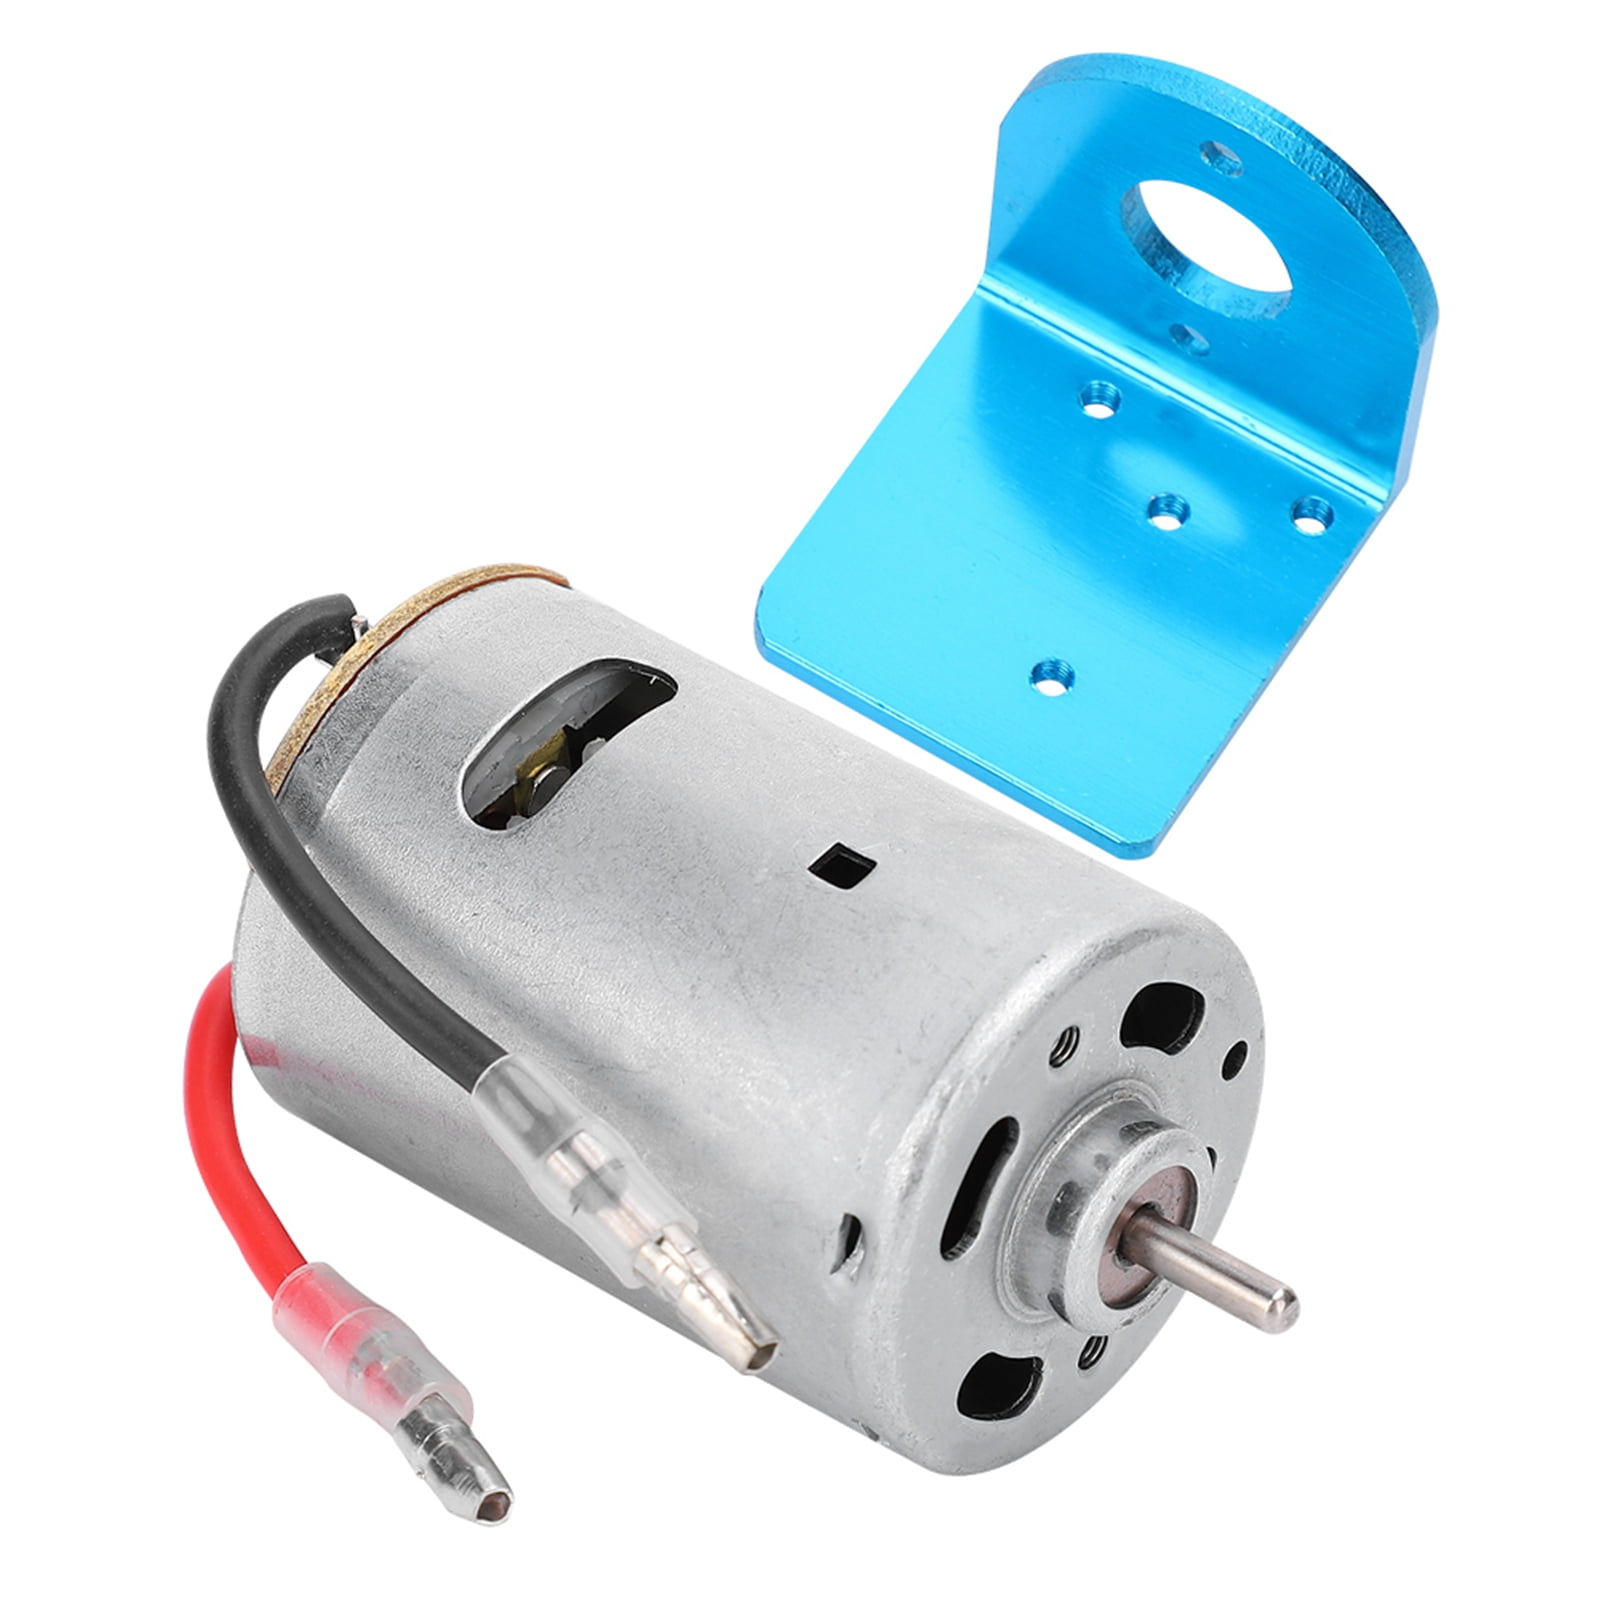 540 Motor has Fan RC Car 1/18 Wltoy A959 A969 A979 K929 Details about   Adjustable Motor mount 